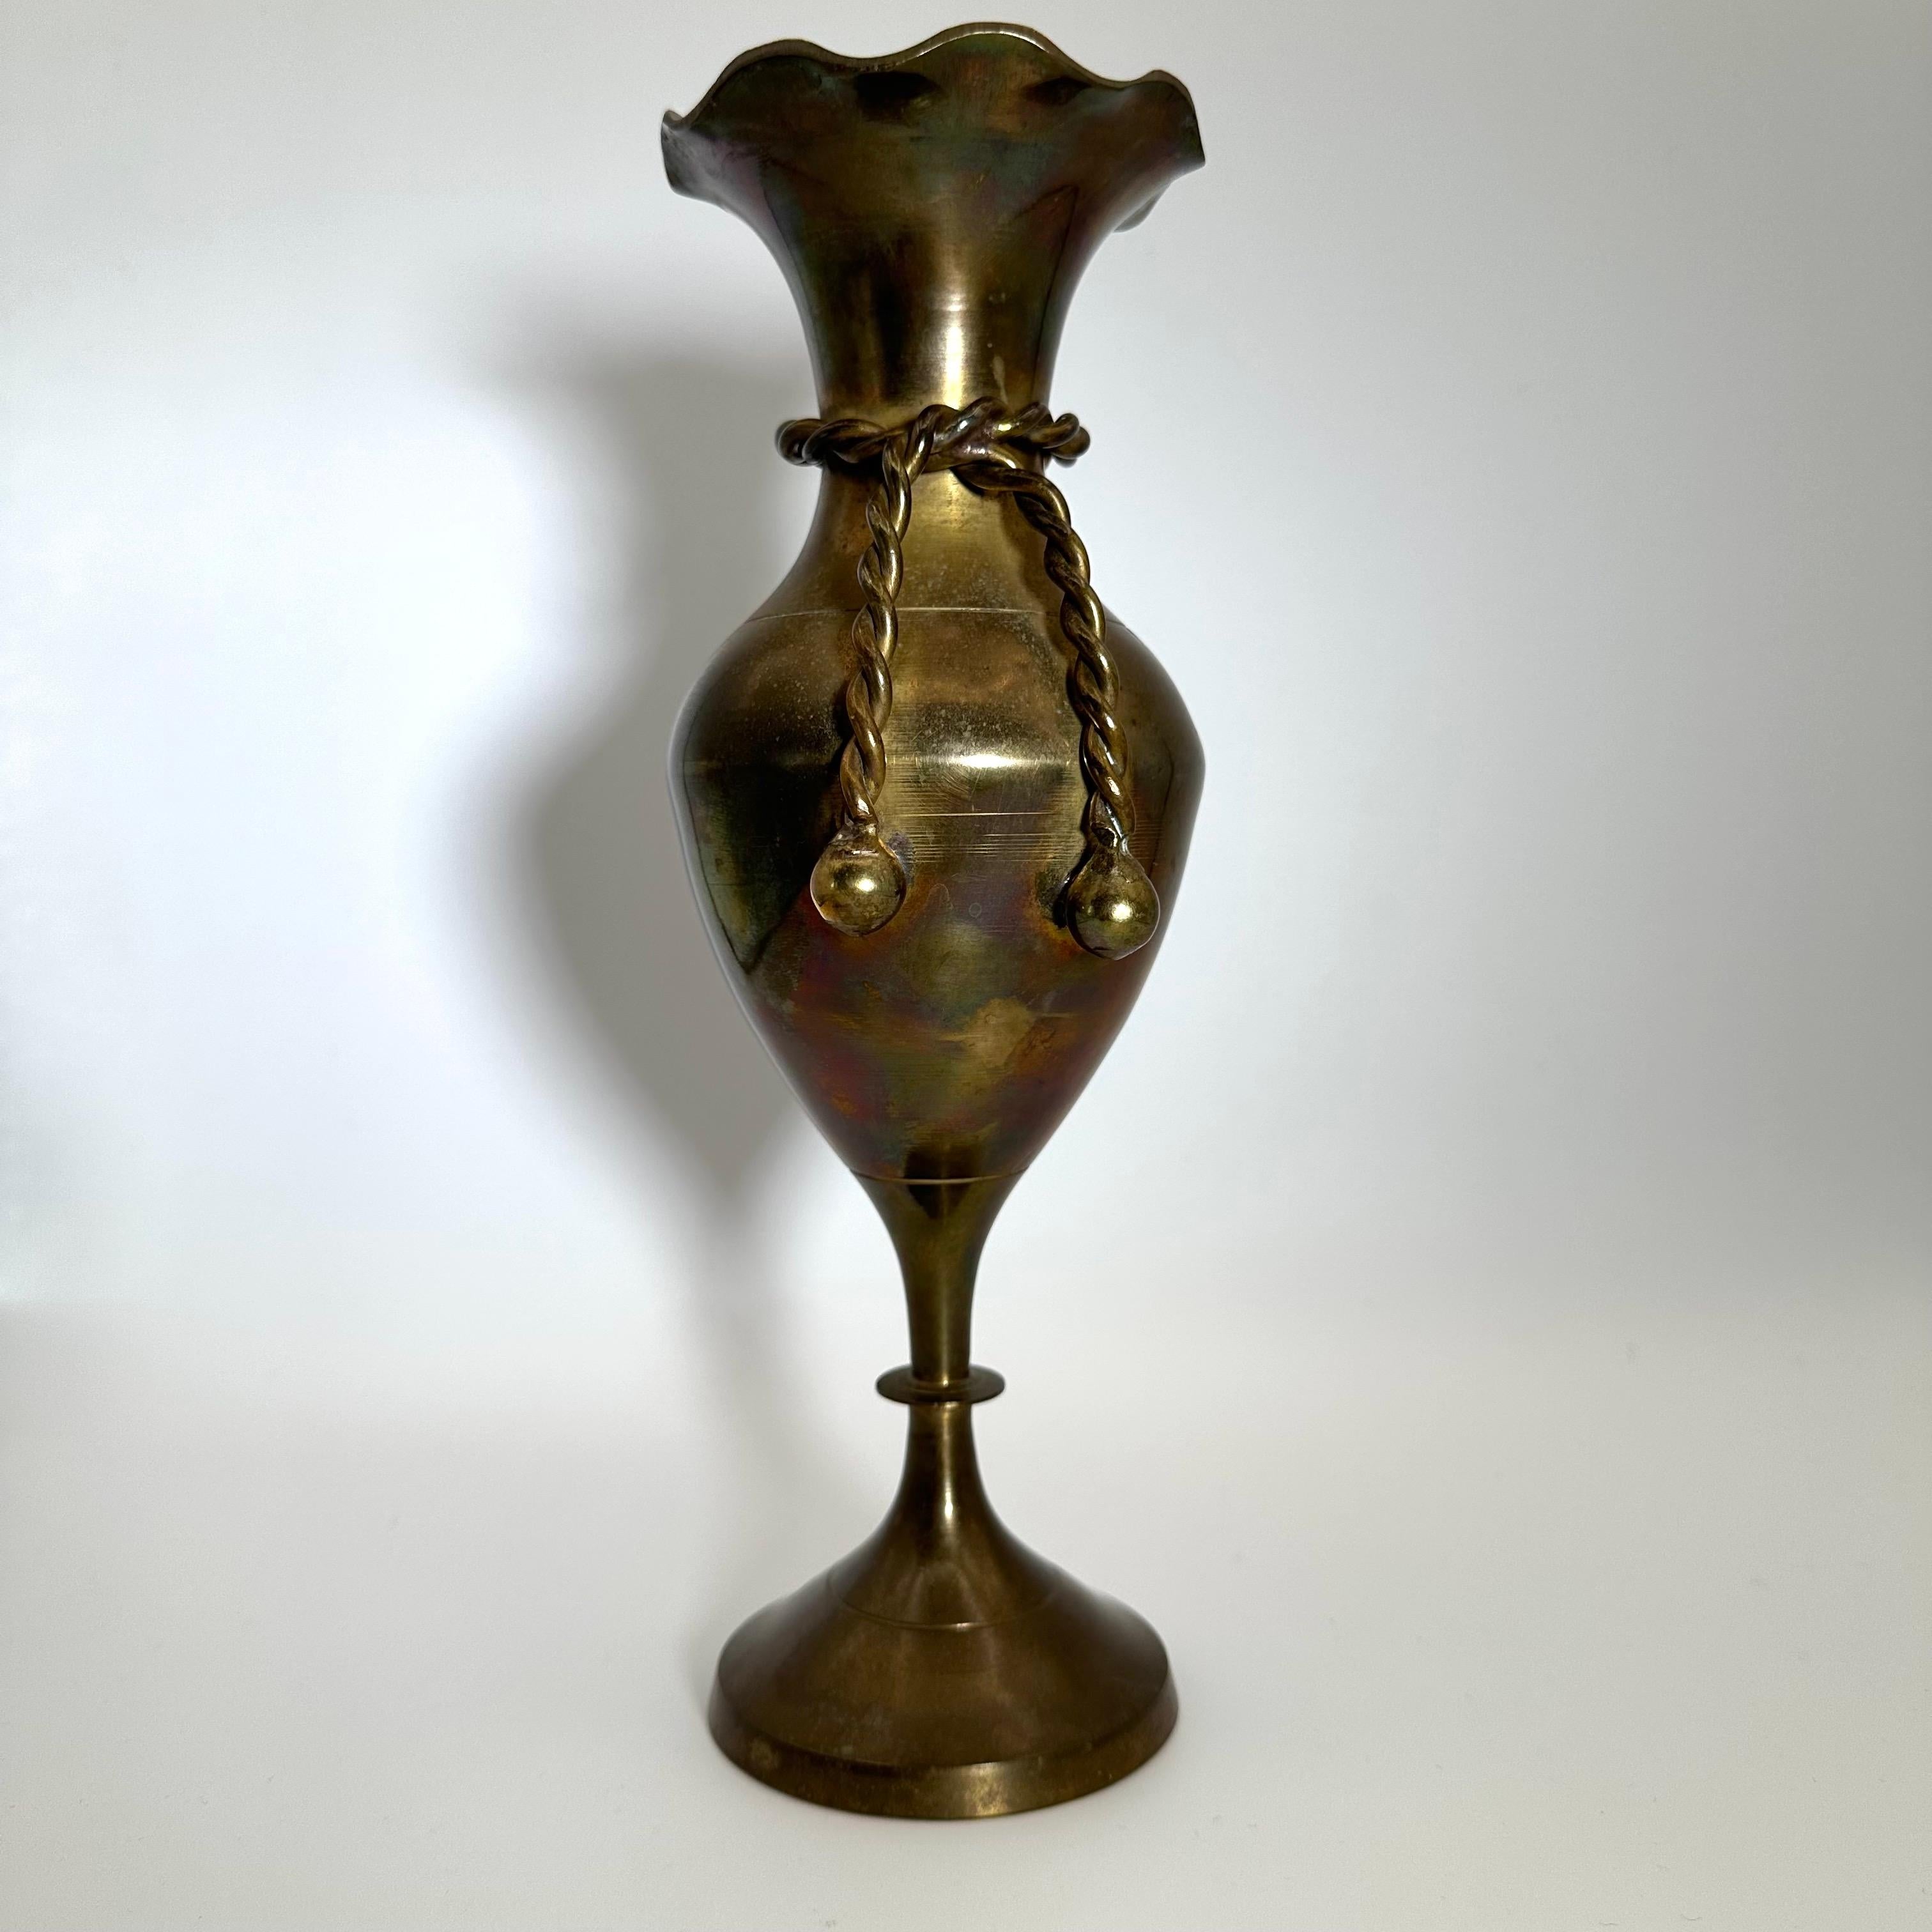 A beautiful and shapely vase cast in brass with one of a kind patination, creating a multicolor appearance. Featuring a curvy, bulbous shape, ringed at the neck by a twisted braided rope, terminating with ball or bead motifs on the ends. Opens at